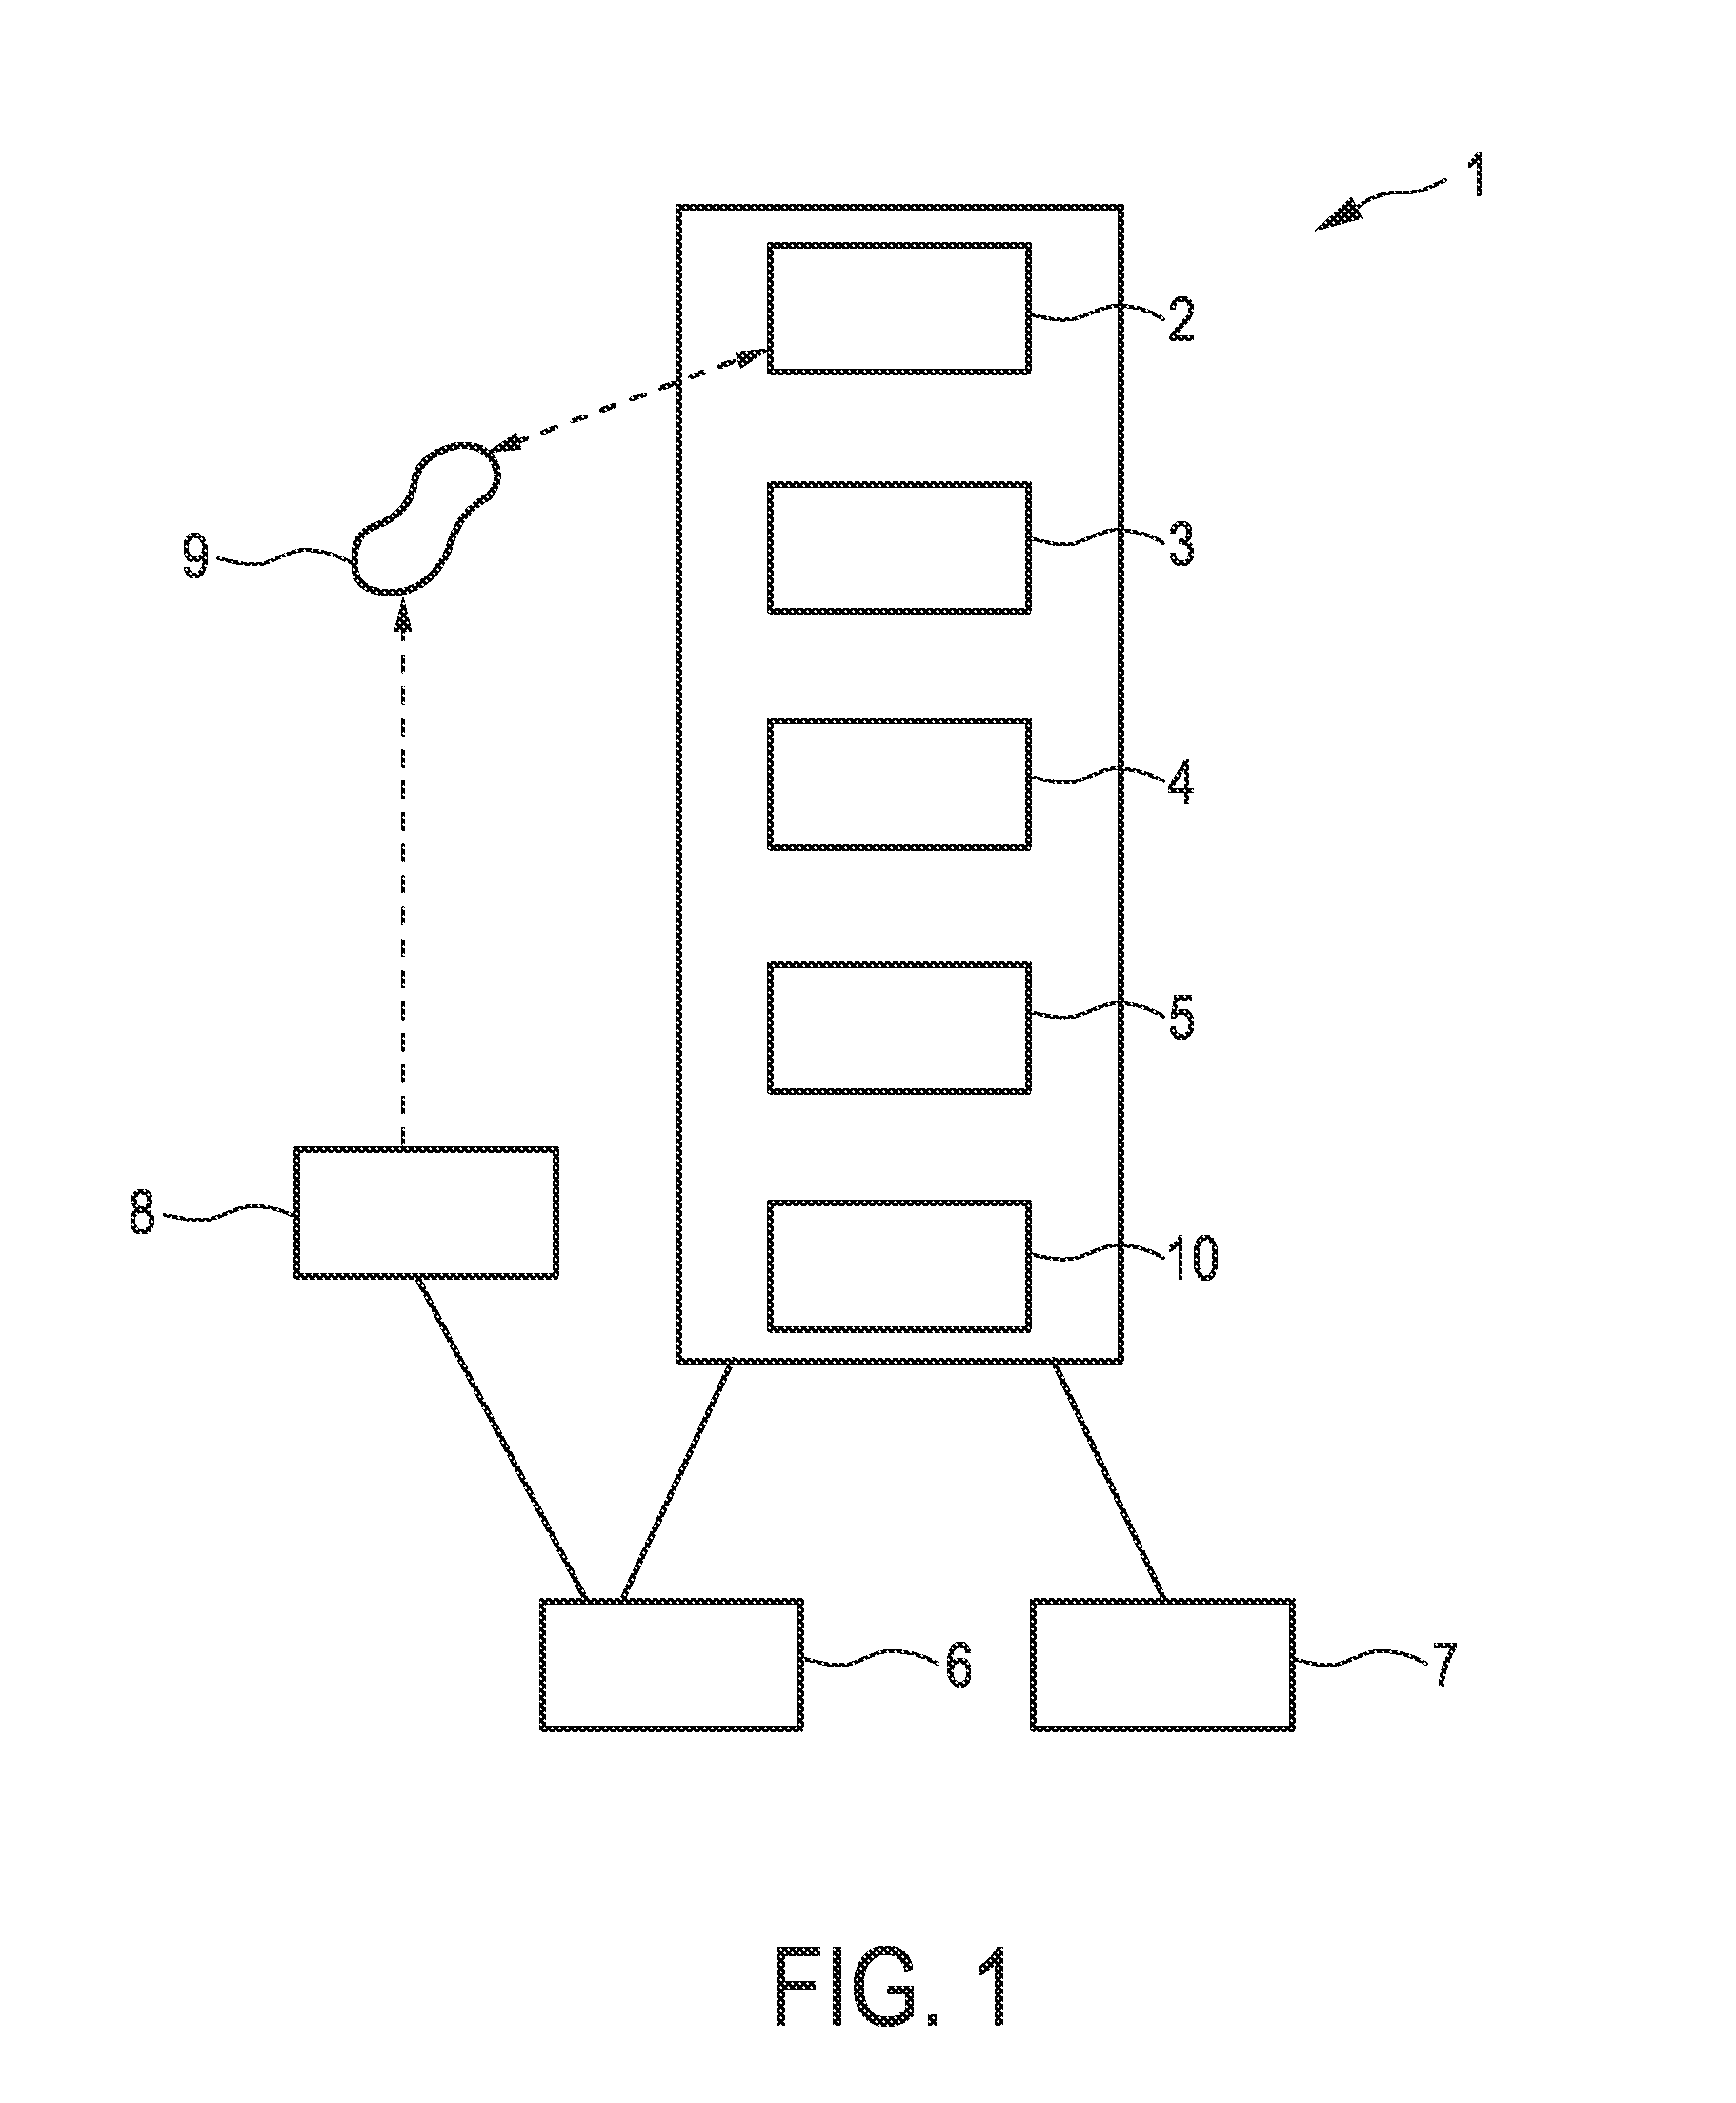 Apparatus for being used for detecting a property of an object